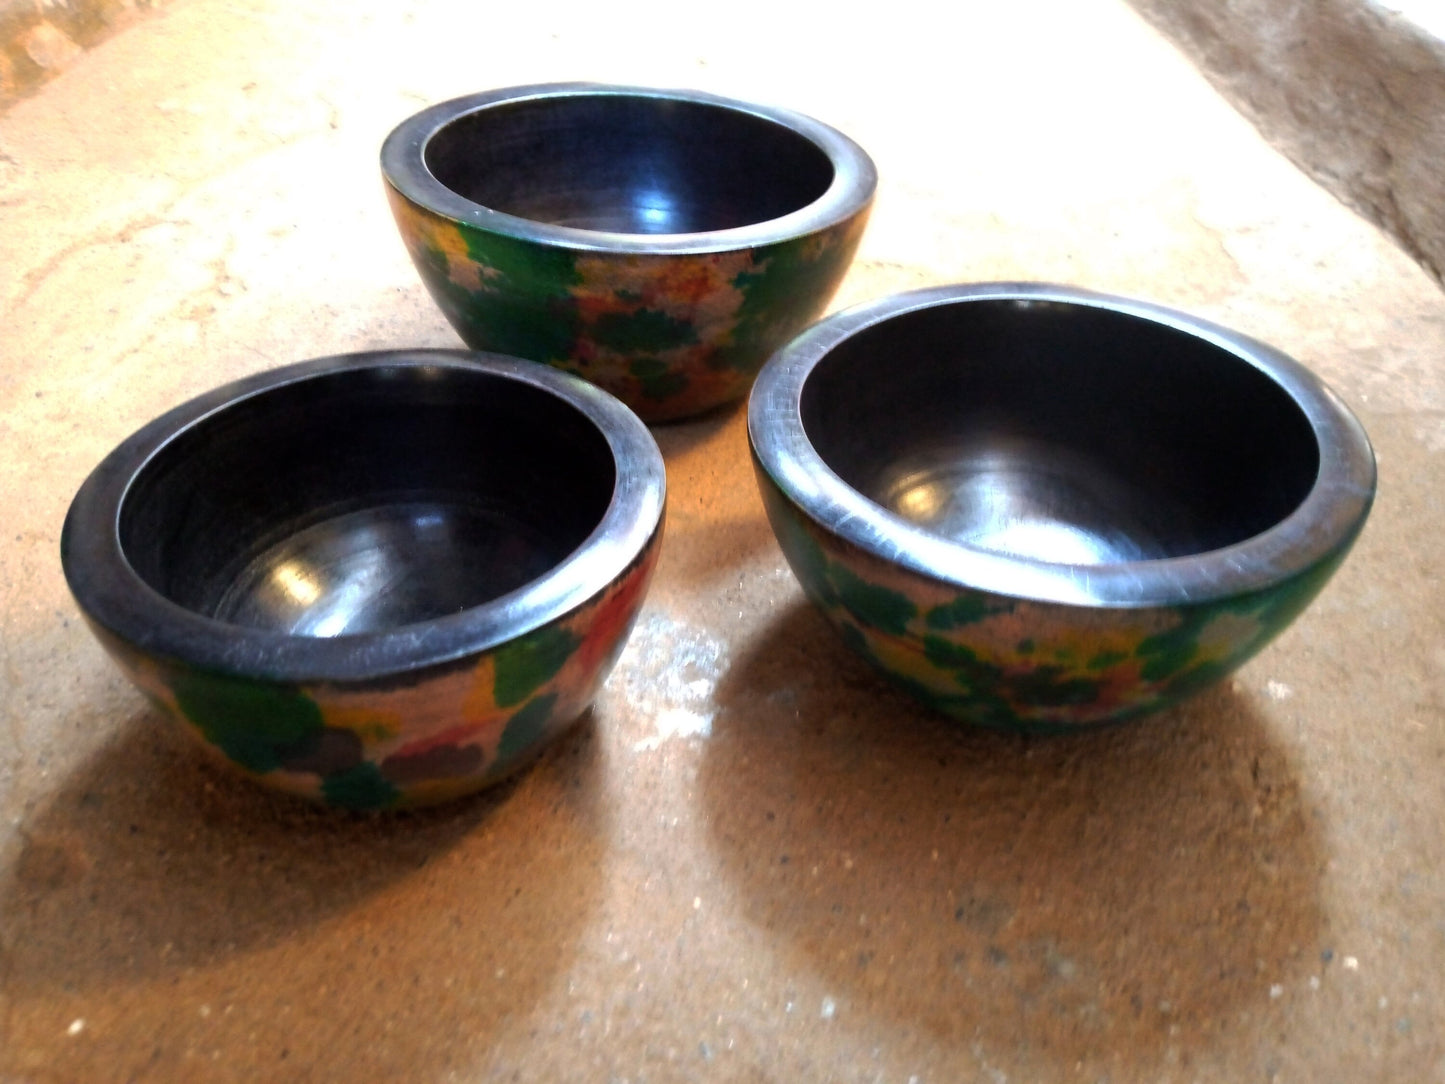 Set of 3 Handmade Wooden Bowls From Africa